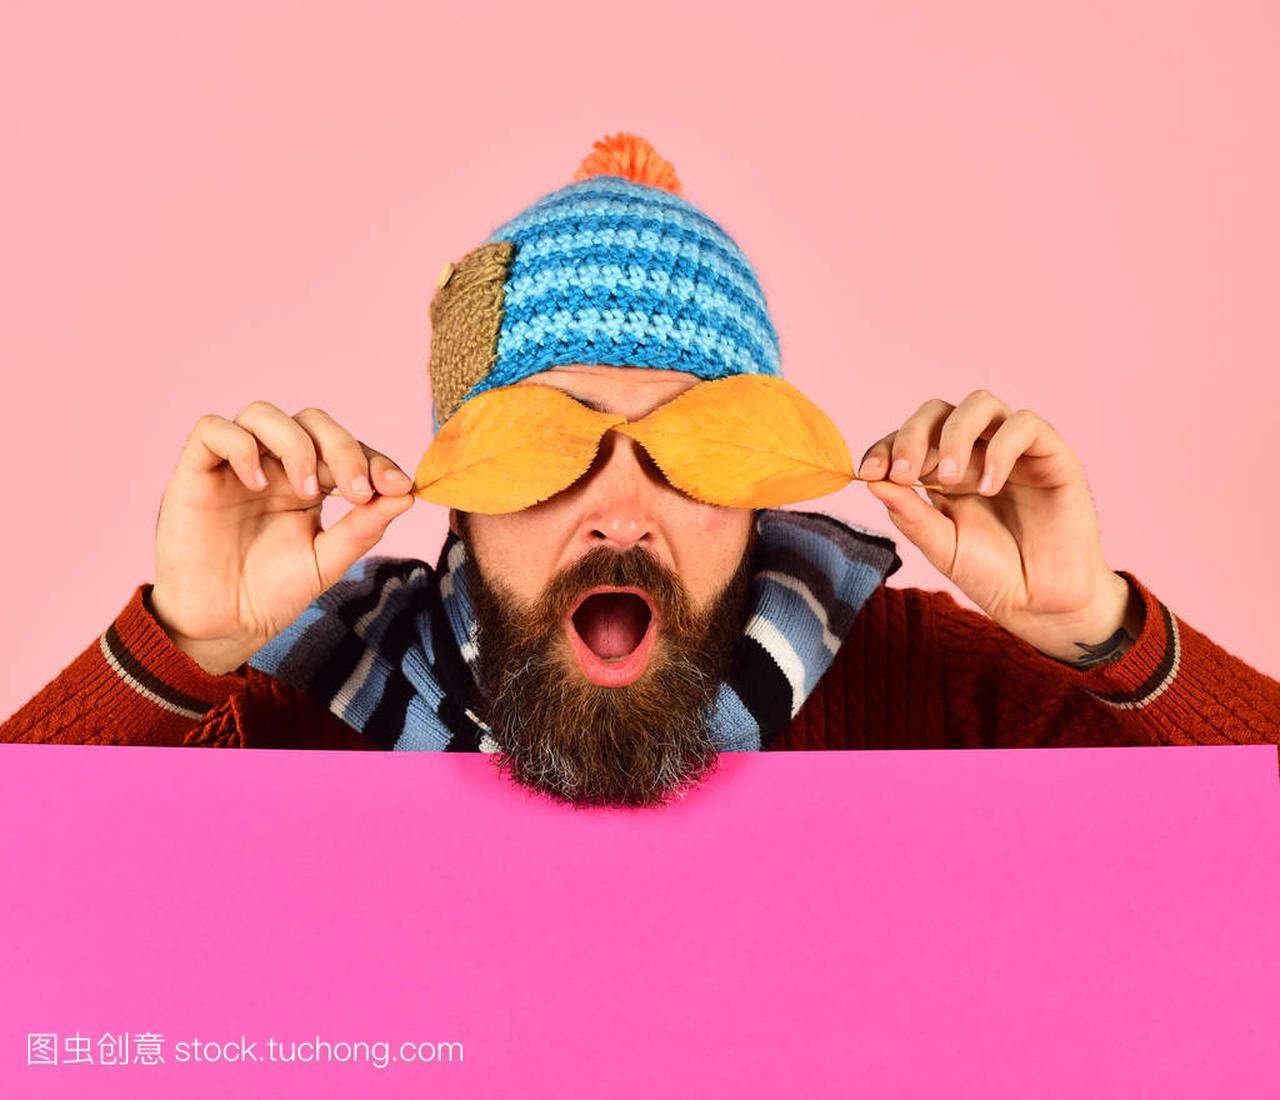 Guy with surprised face wears warm hat on pink